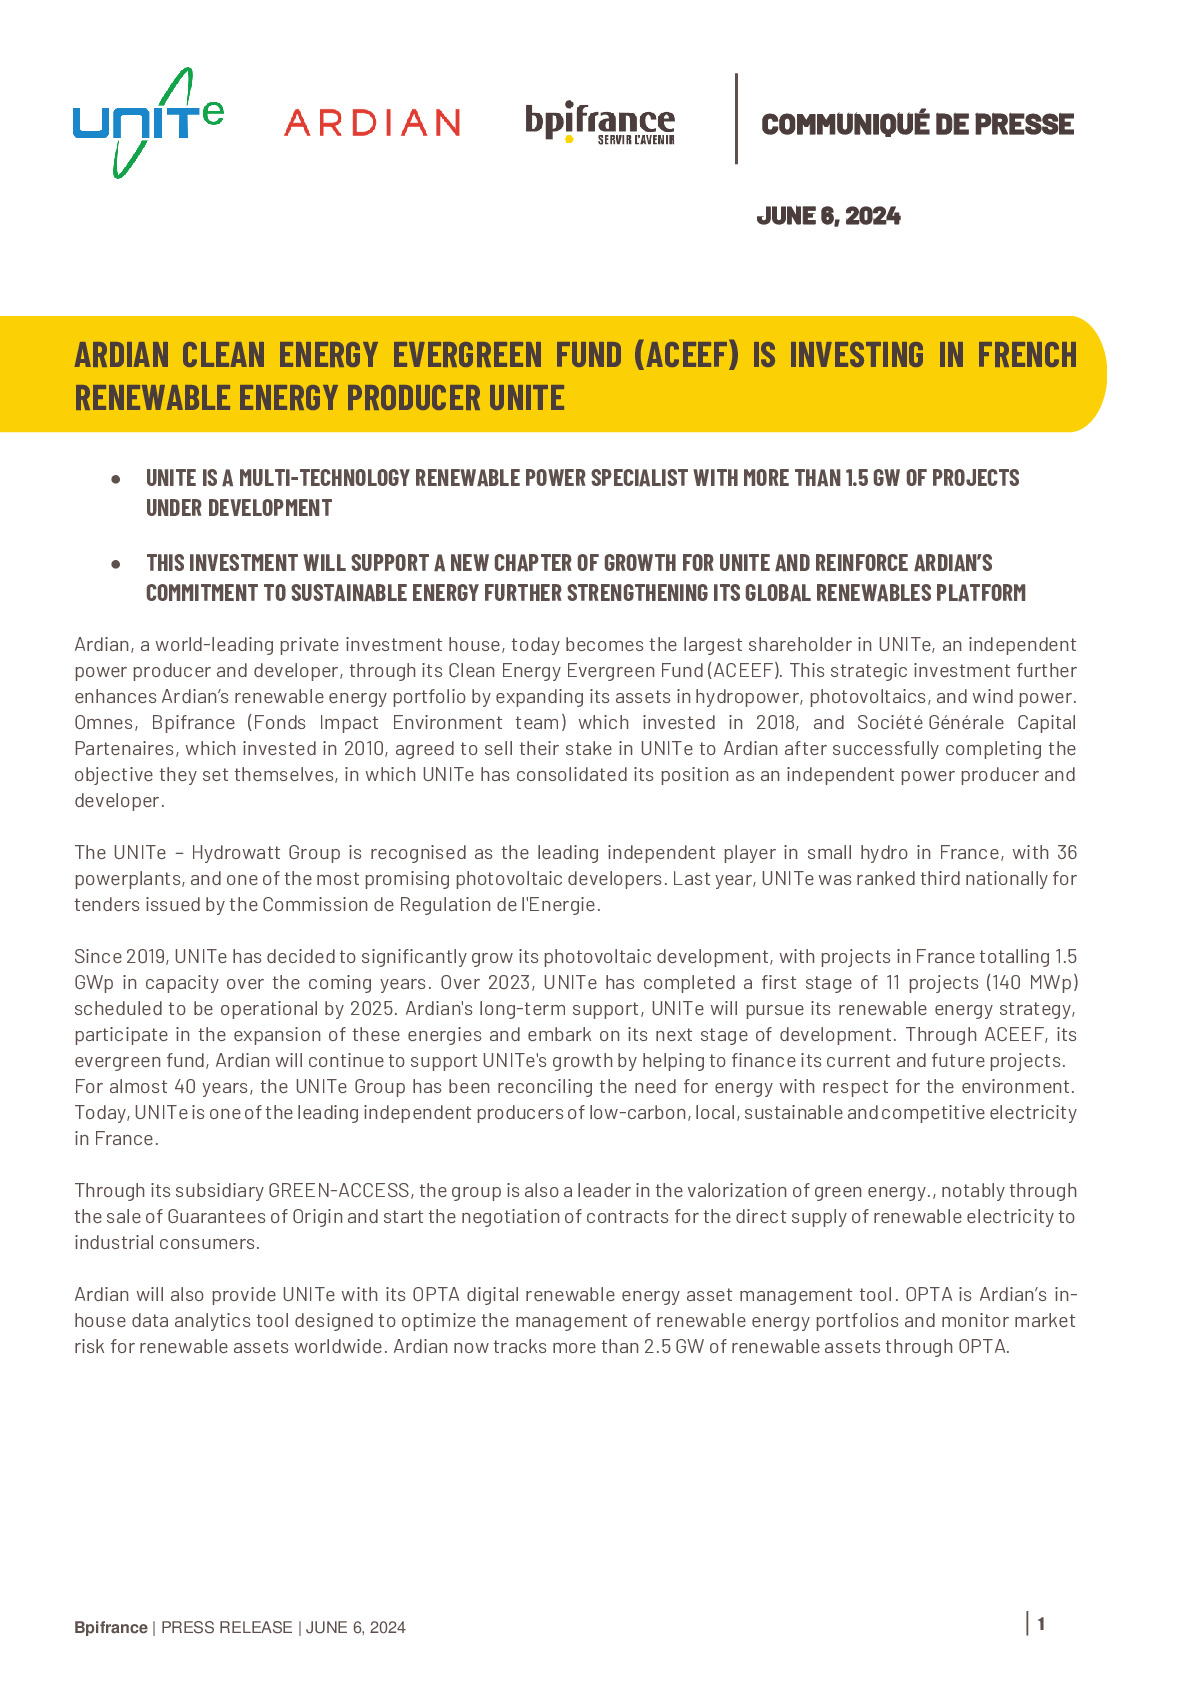 2024 06 06 – PR Ardian Clean Energy Evergreen Fund (ACEEF) invests in French independent renewable energy producer and developer UNITe